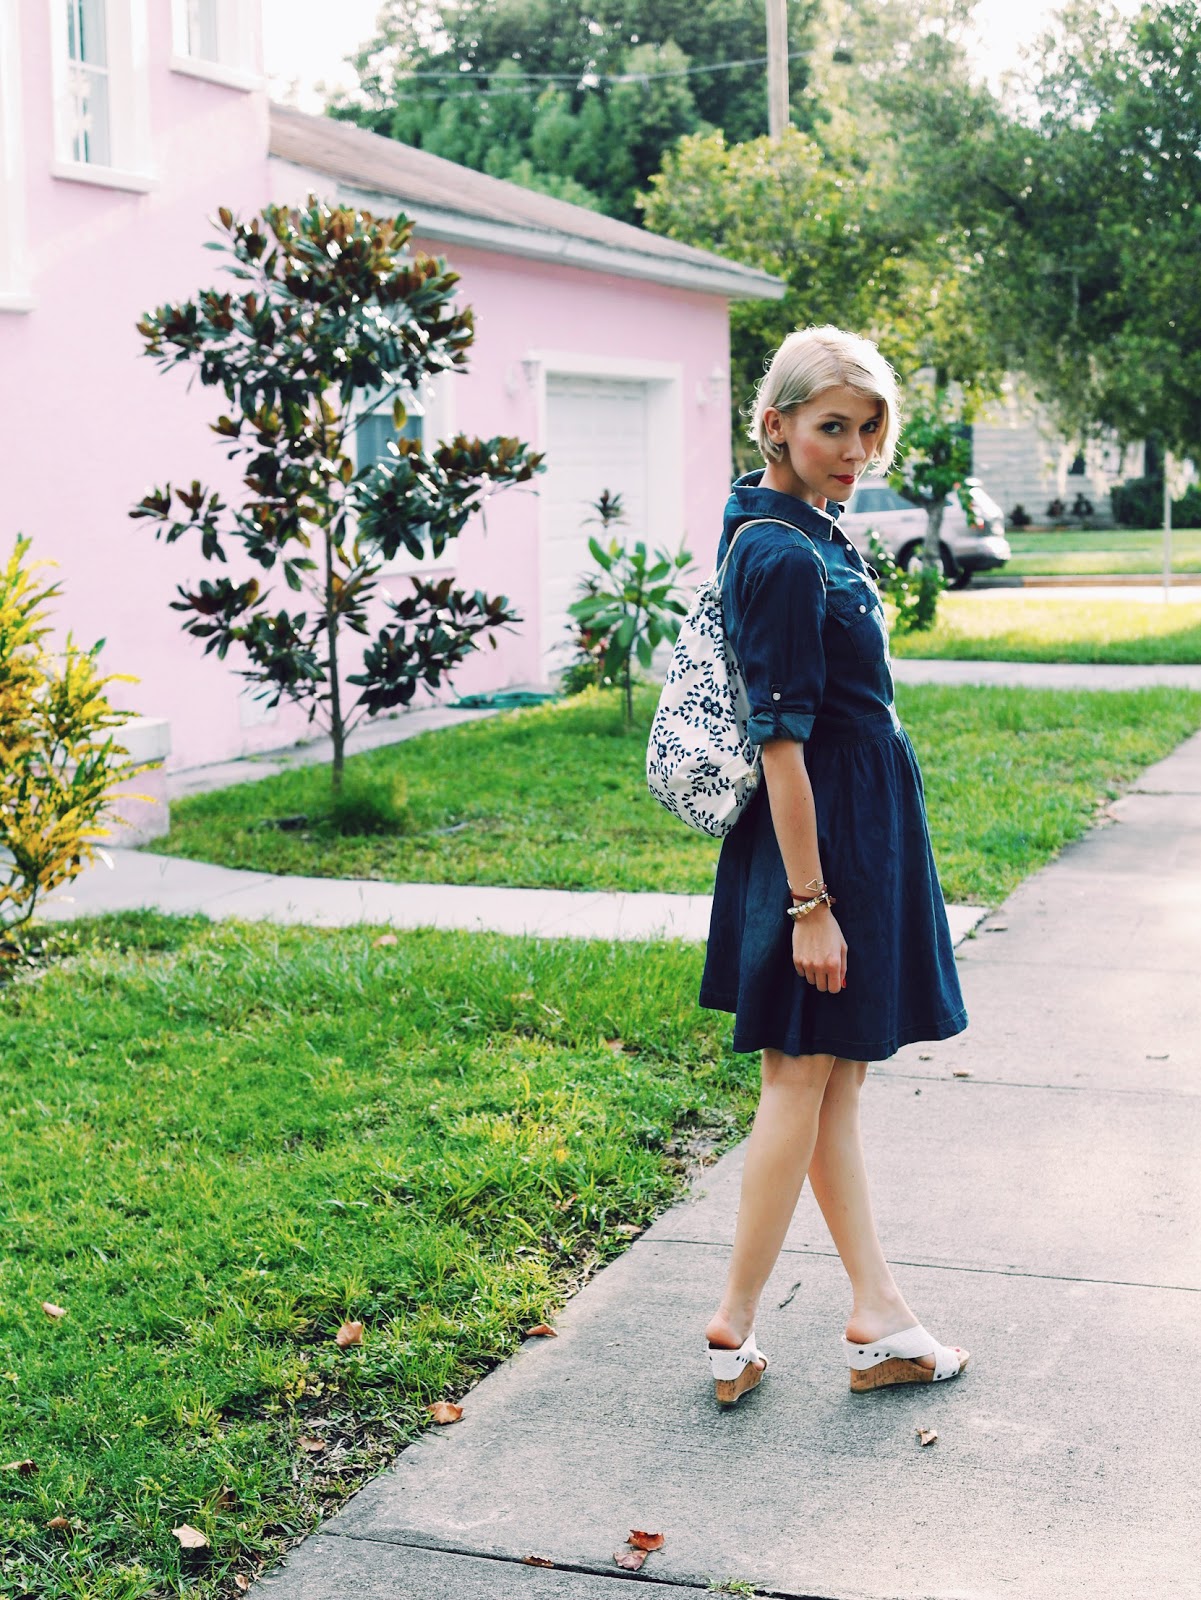 Effortlessly Cute In Denim Dress - The Kawaii Planet : Fashion and ...